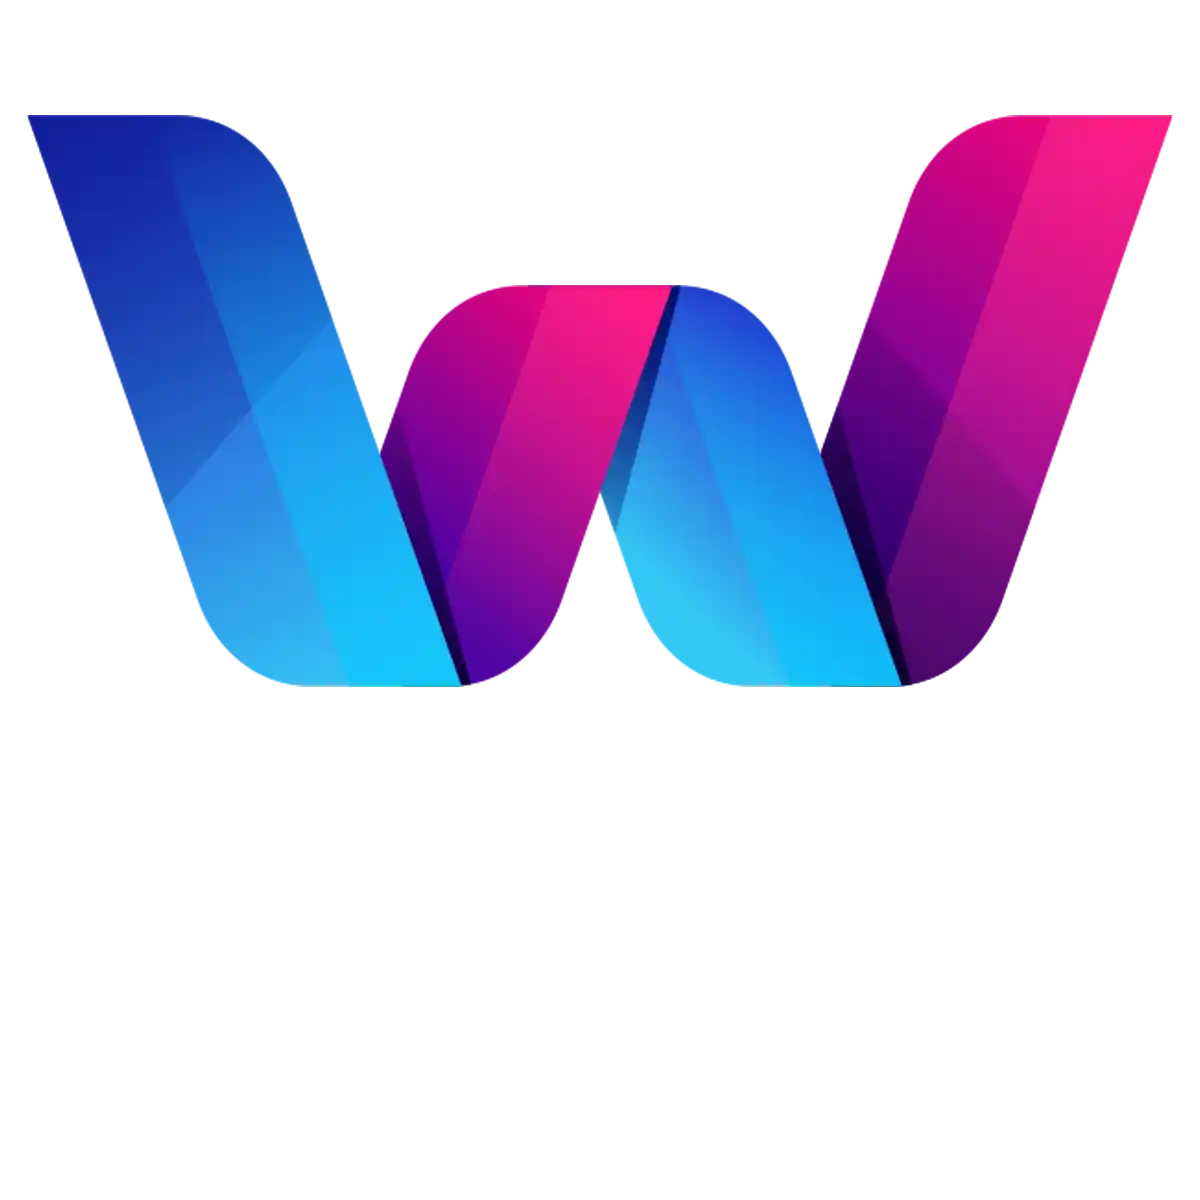 WestMetric | Maximize your online potential. LA-Based Full Service Digital Agency.